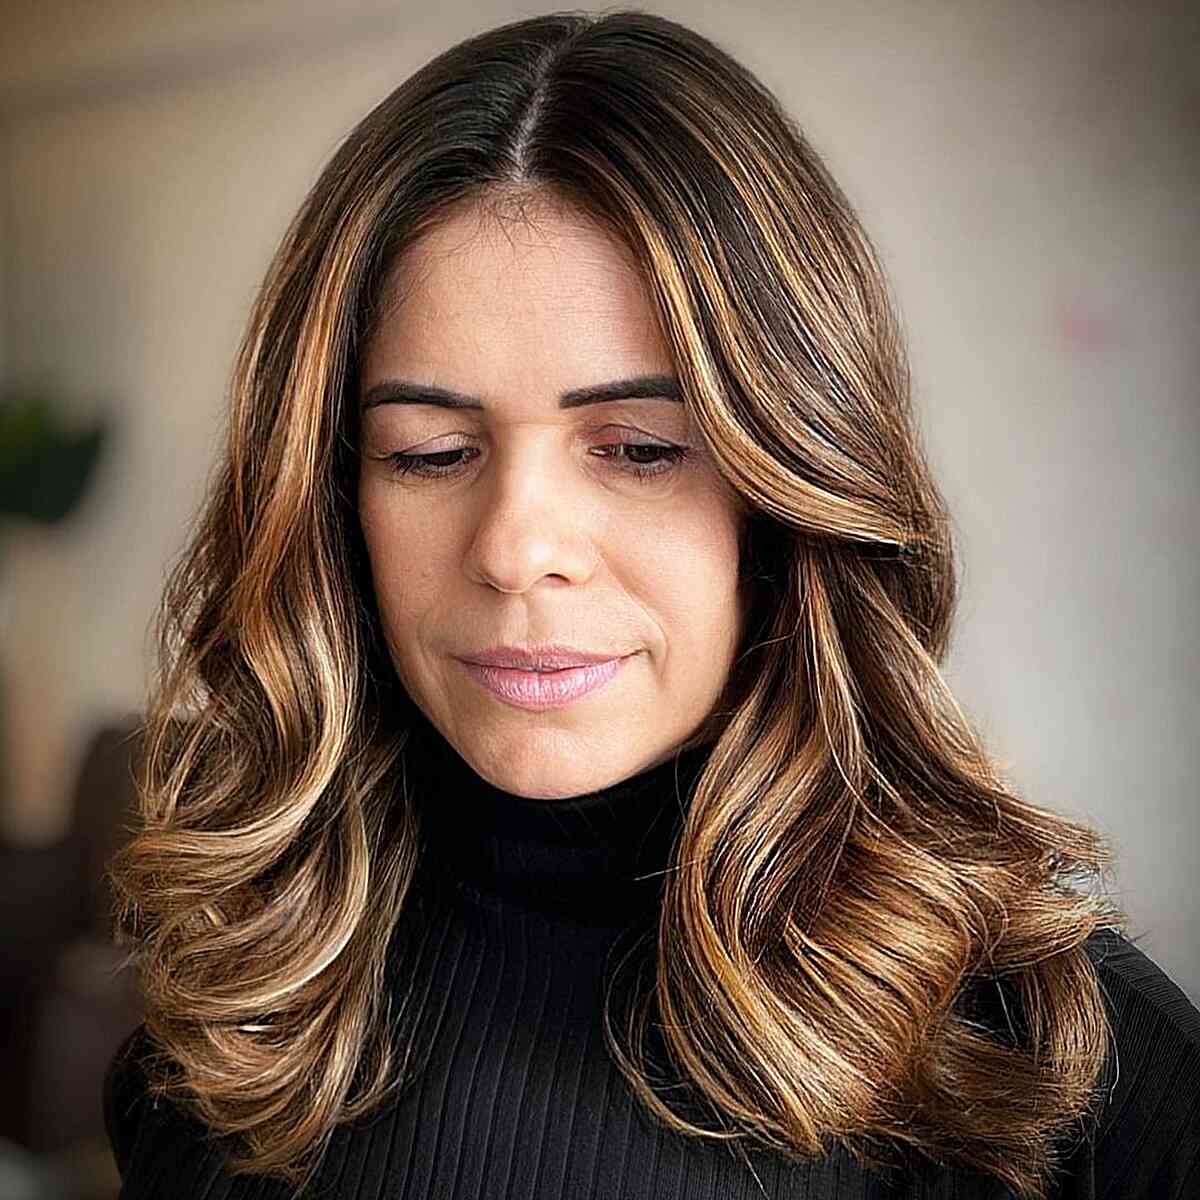 Autumn Warm Brown-Blonde with Dark Roots for Mature Women with Mid-Long Hair